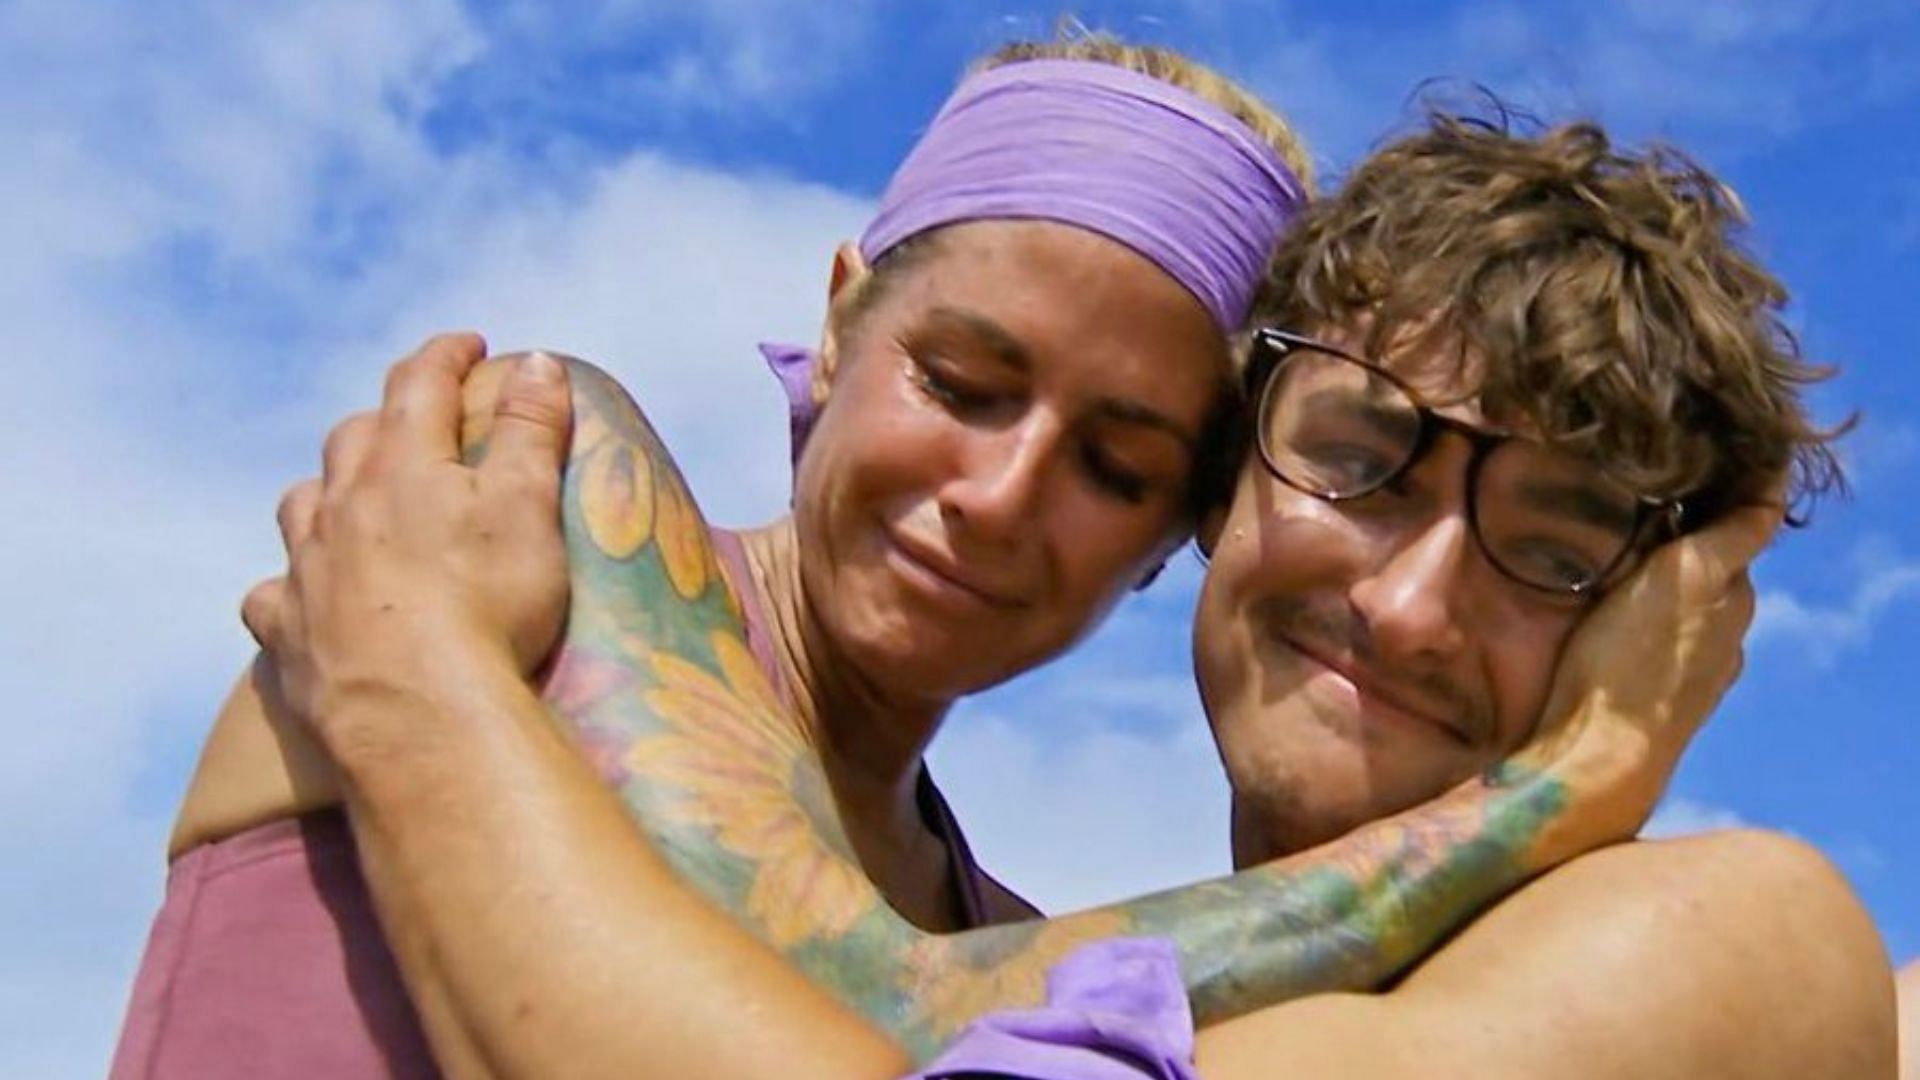 Carolyn and Carson were paired up for the Survivor immunity challenge